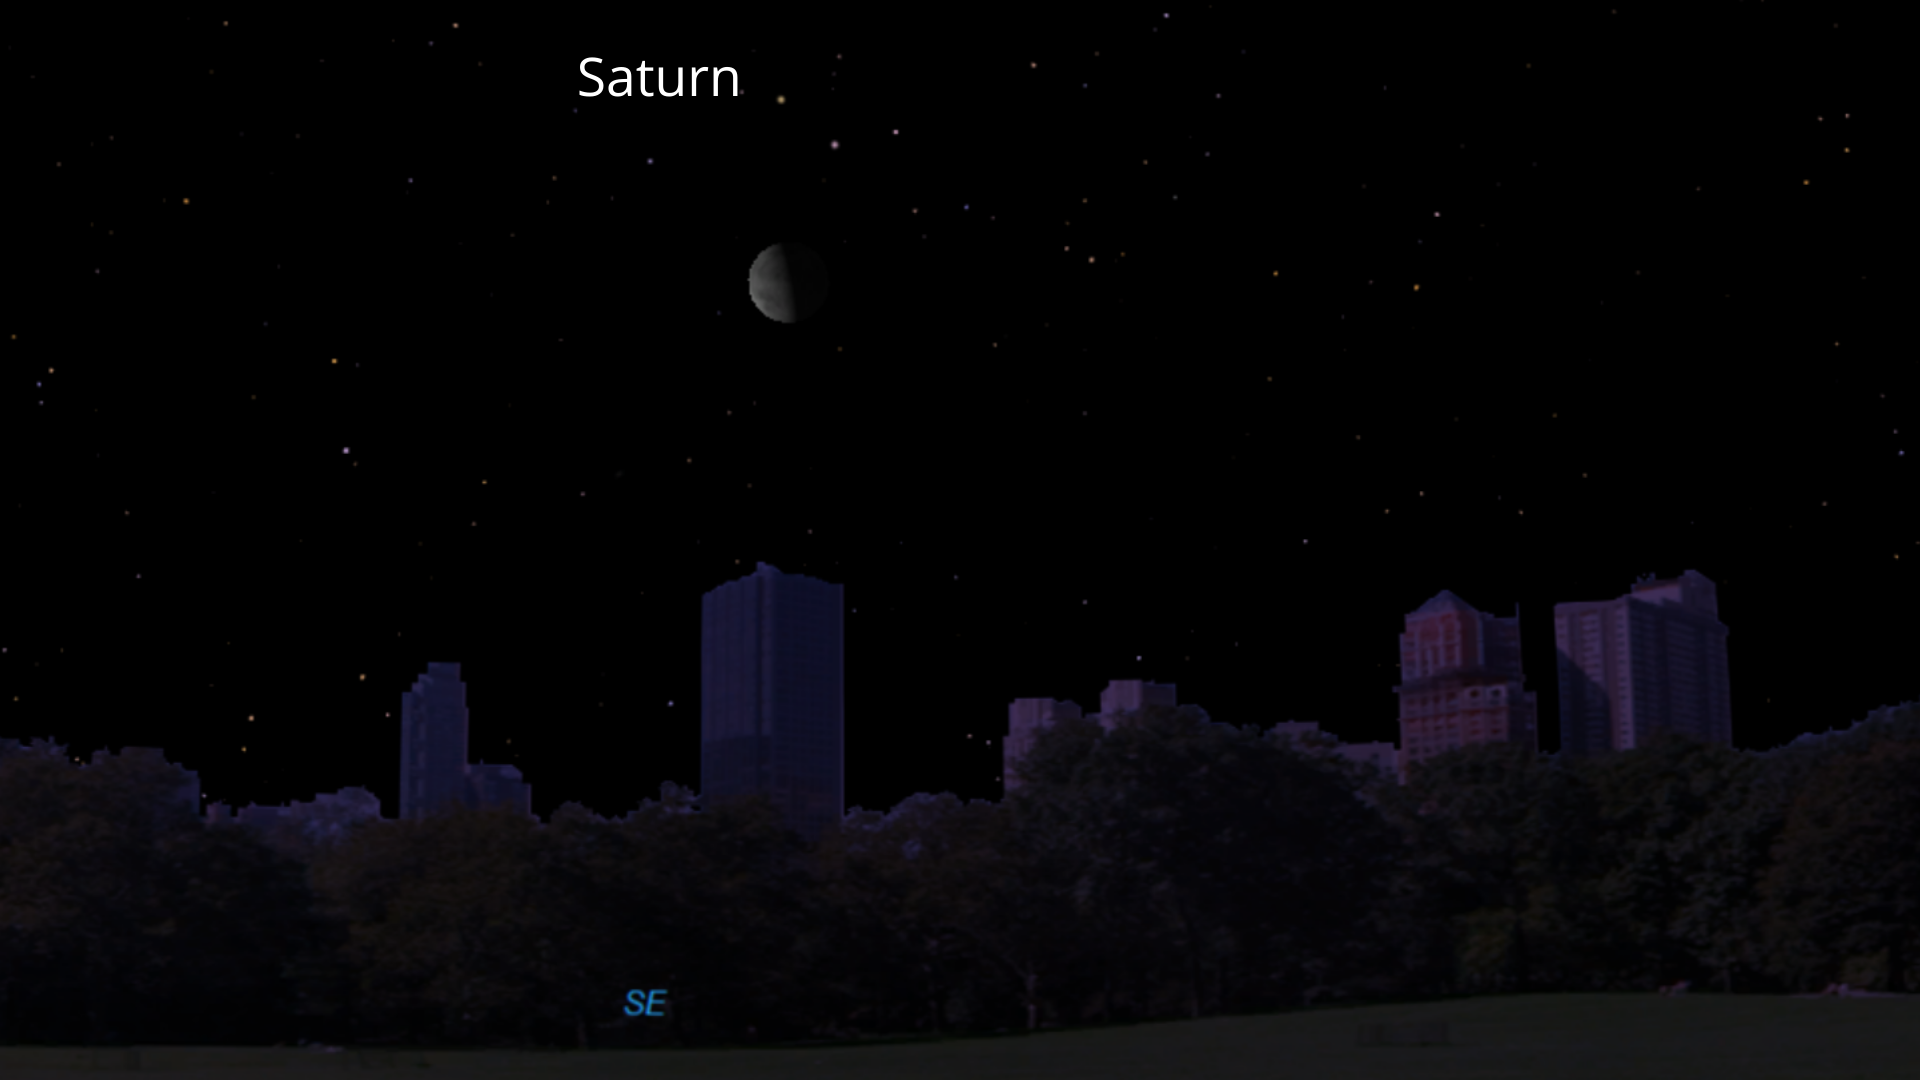 On May 22, Saturn will shine as a bright yellowish-white star 5 degrees above the last quarter moon.